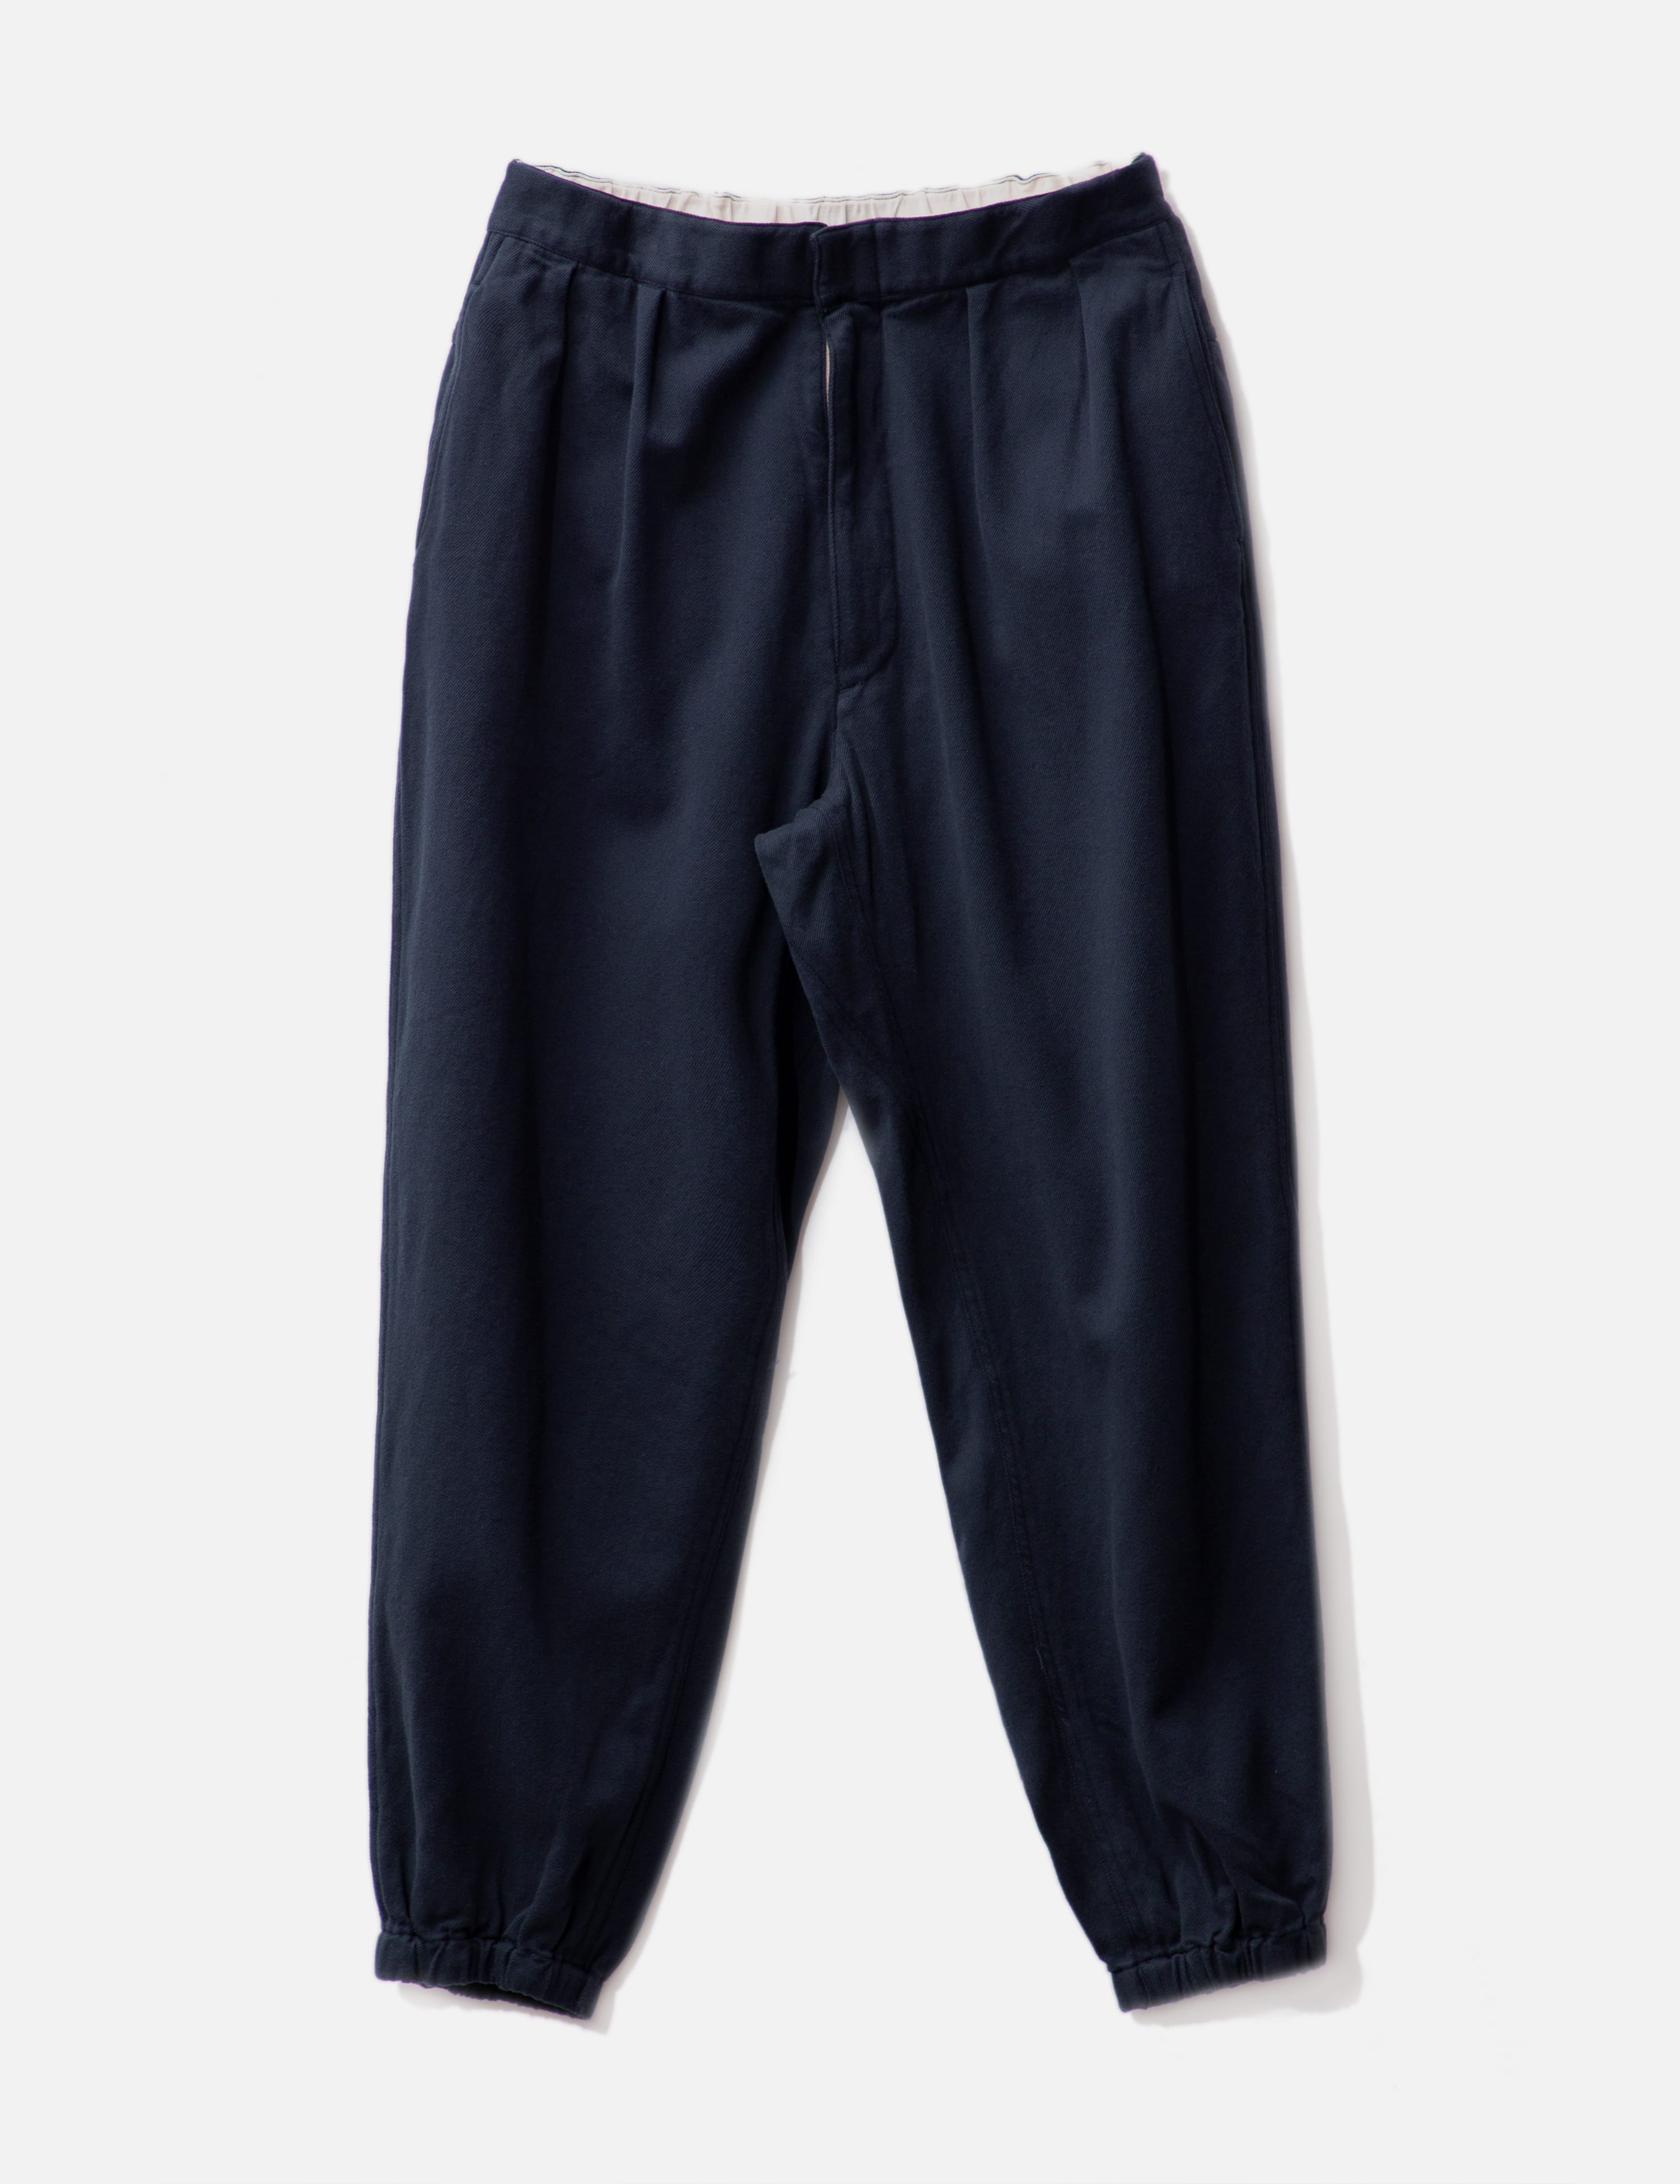 Nanamica - Cotton Wool Twill Track Pants | HBX - Globally Curated